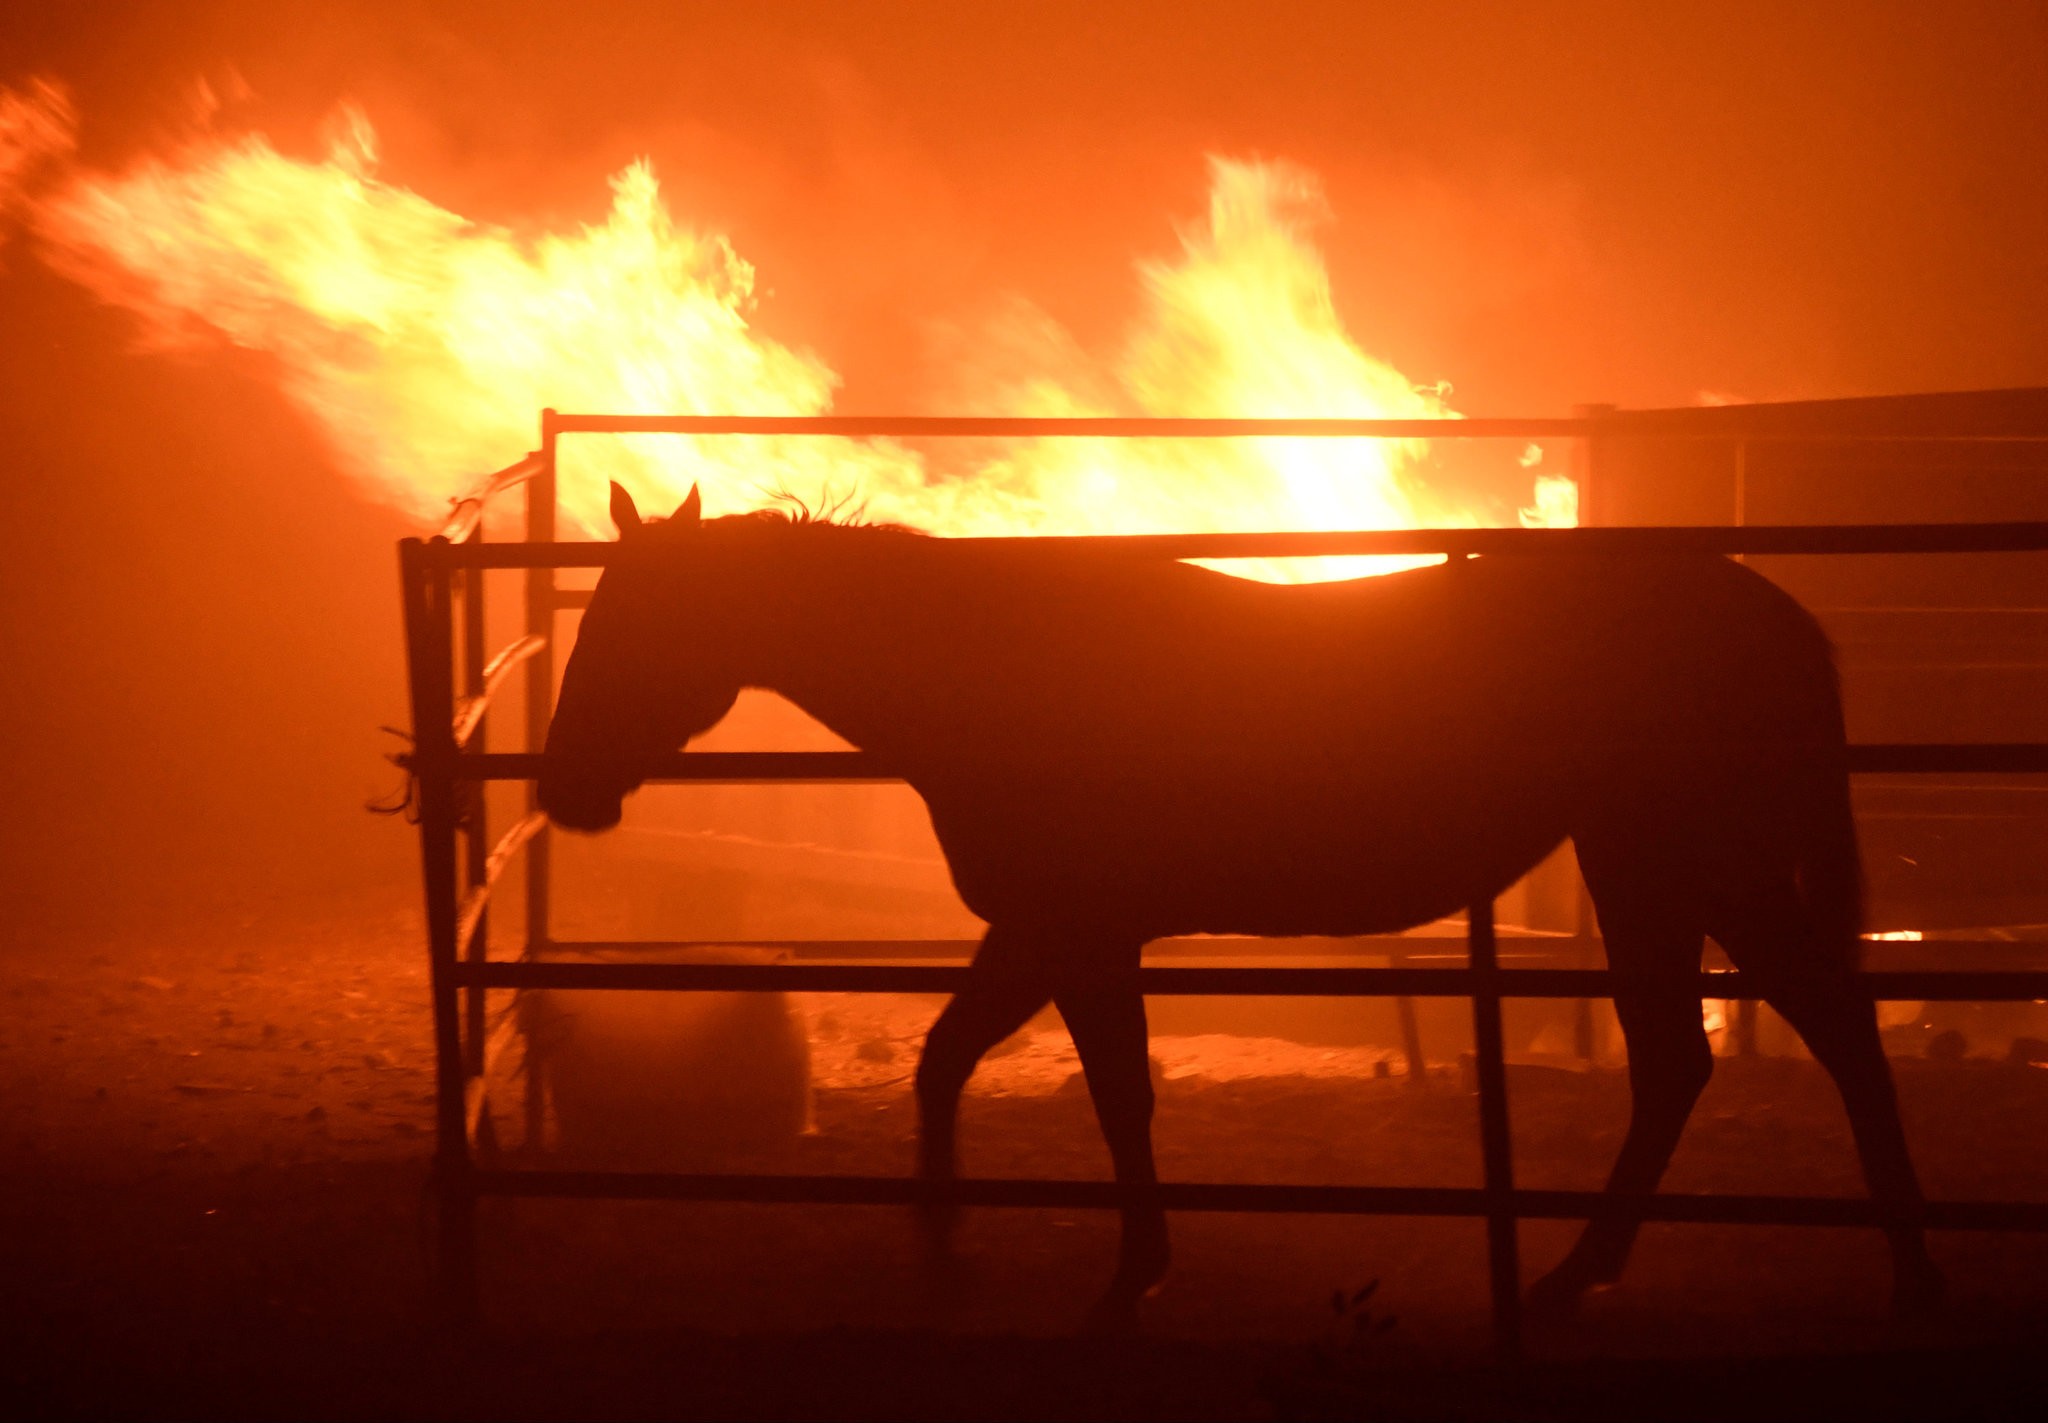  A horse was left behind during the fire in Sylmar, Calif., on Tuesday. NY Times/Credit: Gene Blevins/Reuters   